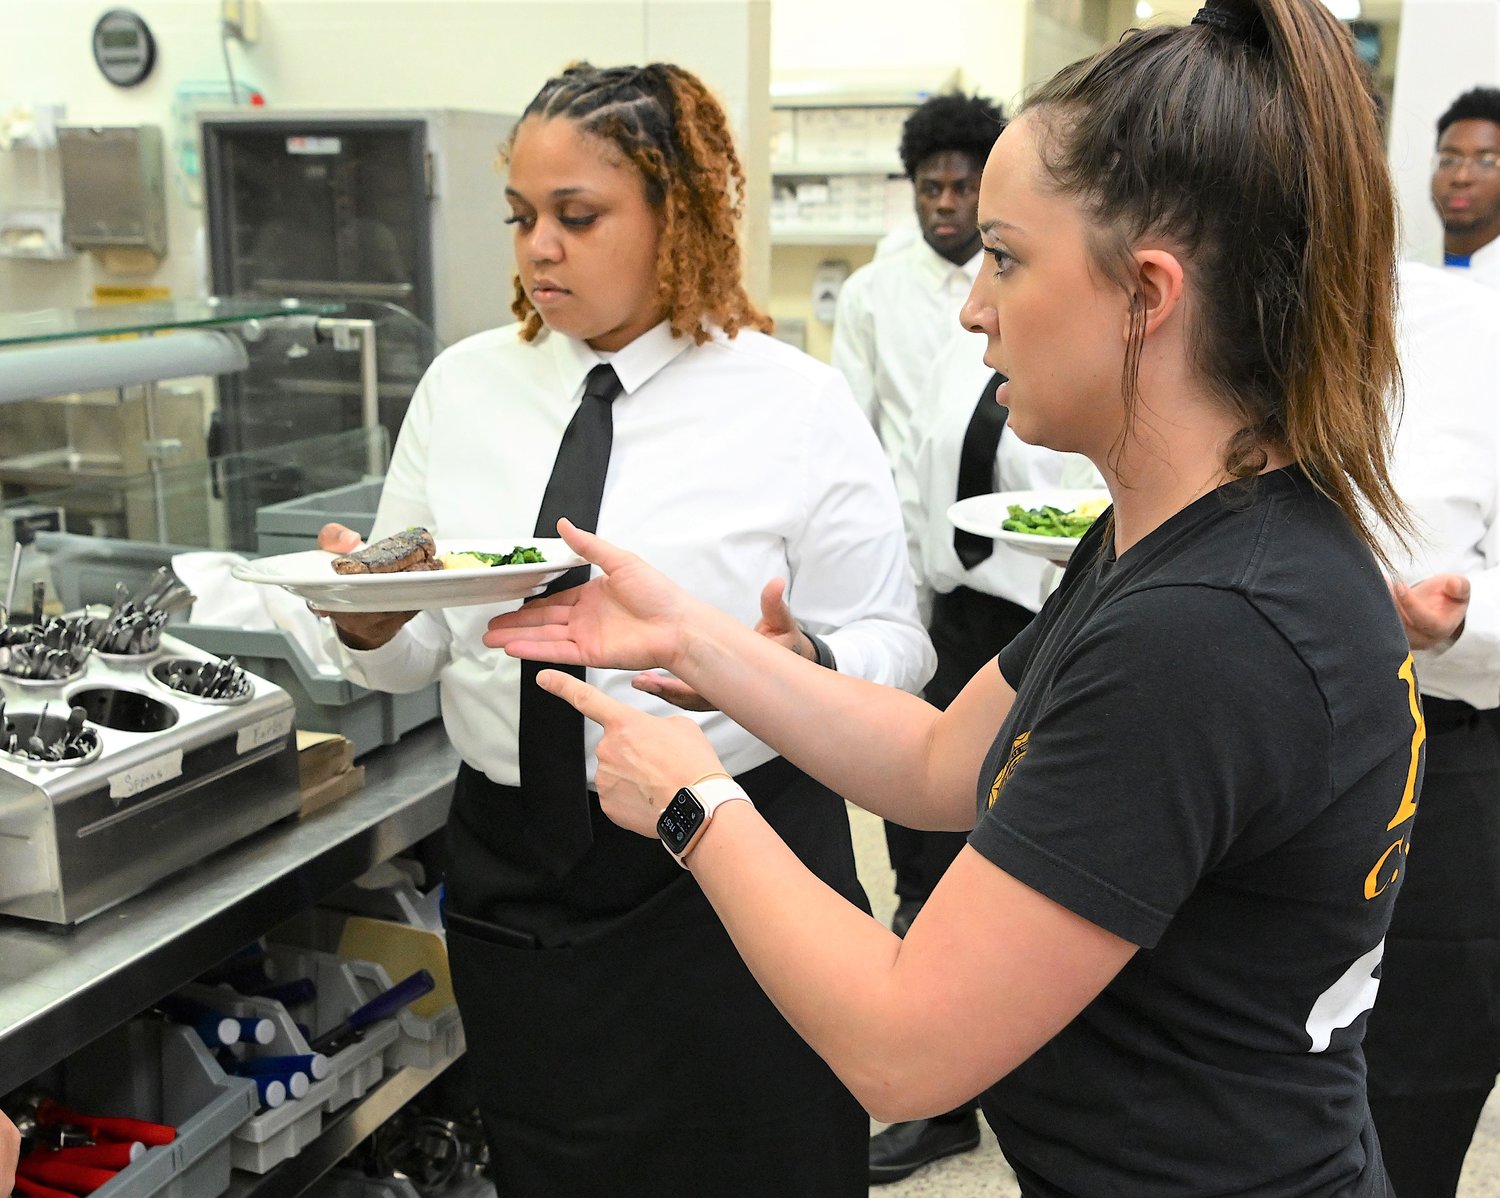 A culinary arts student gets instruction at FTCC.